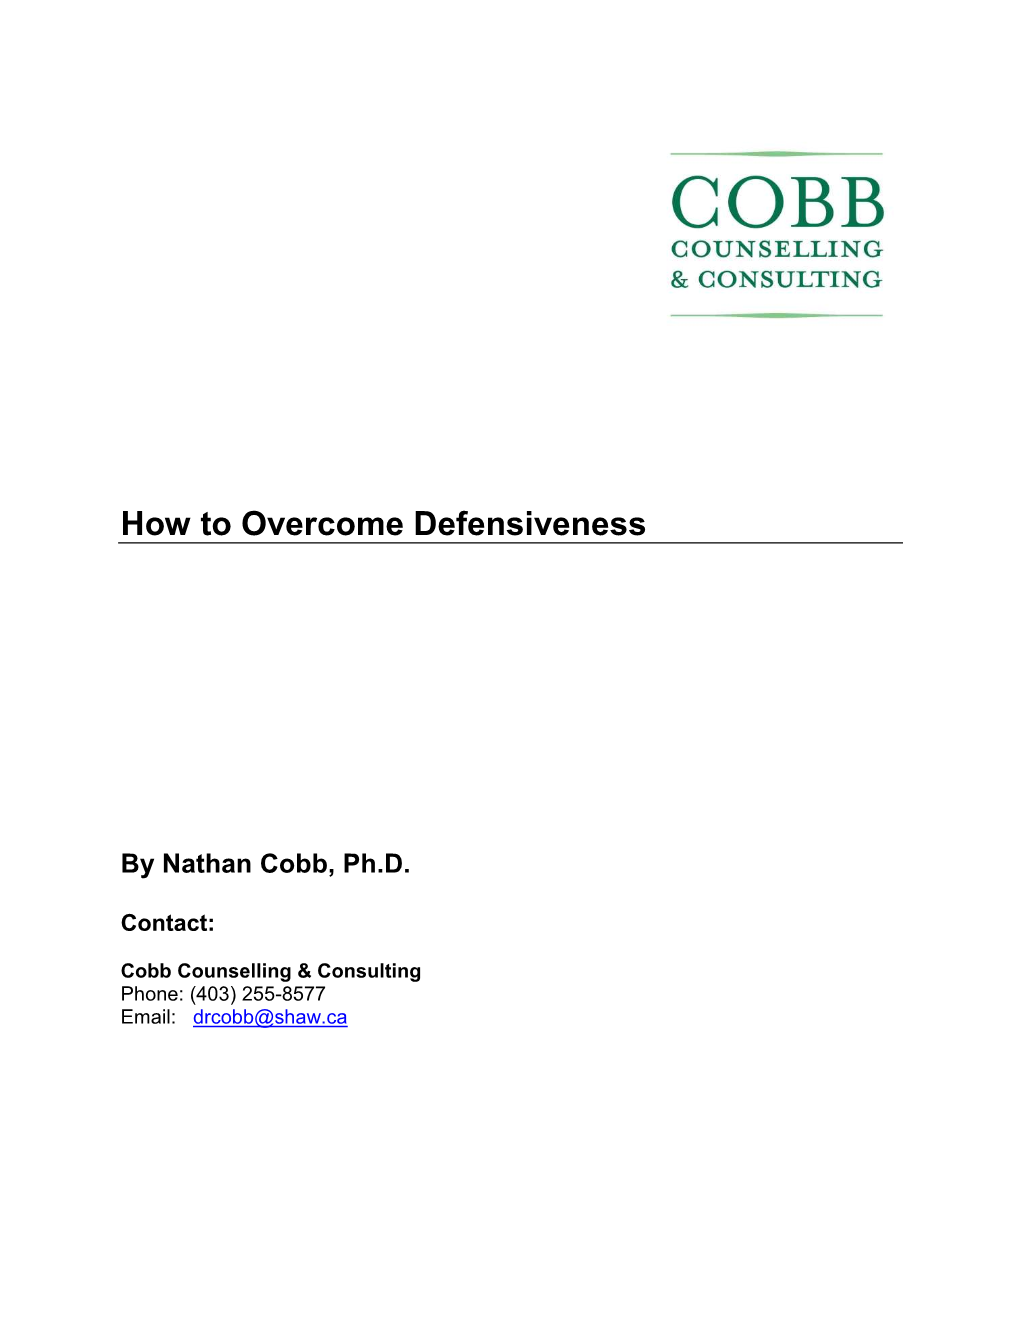 How to Overcome Defensiveness